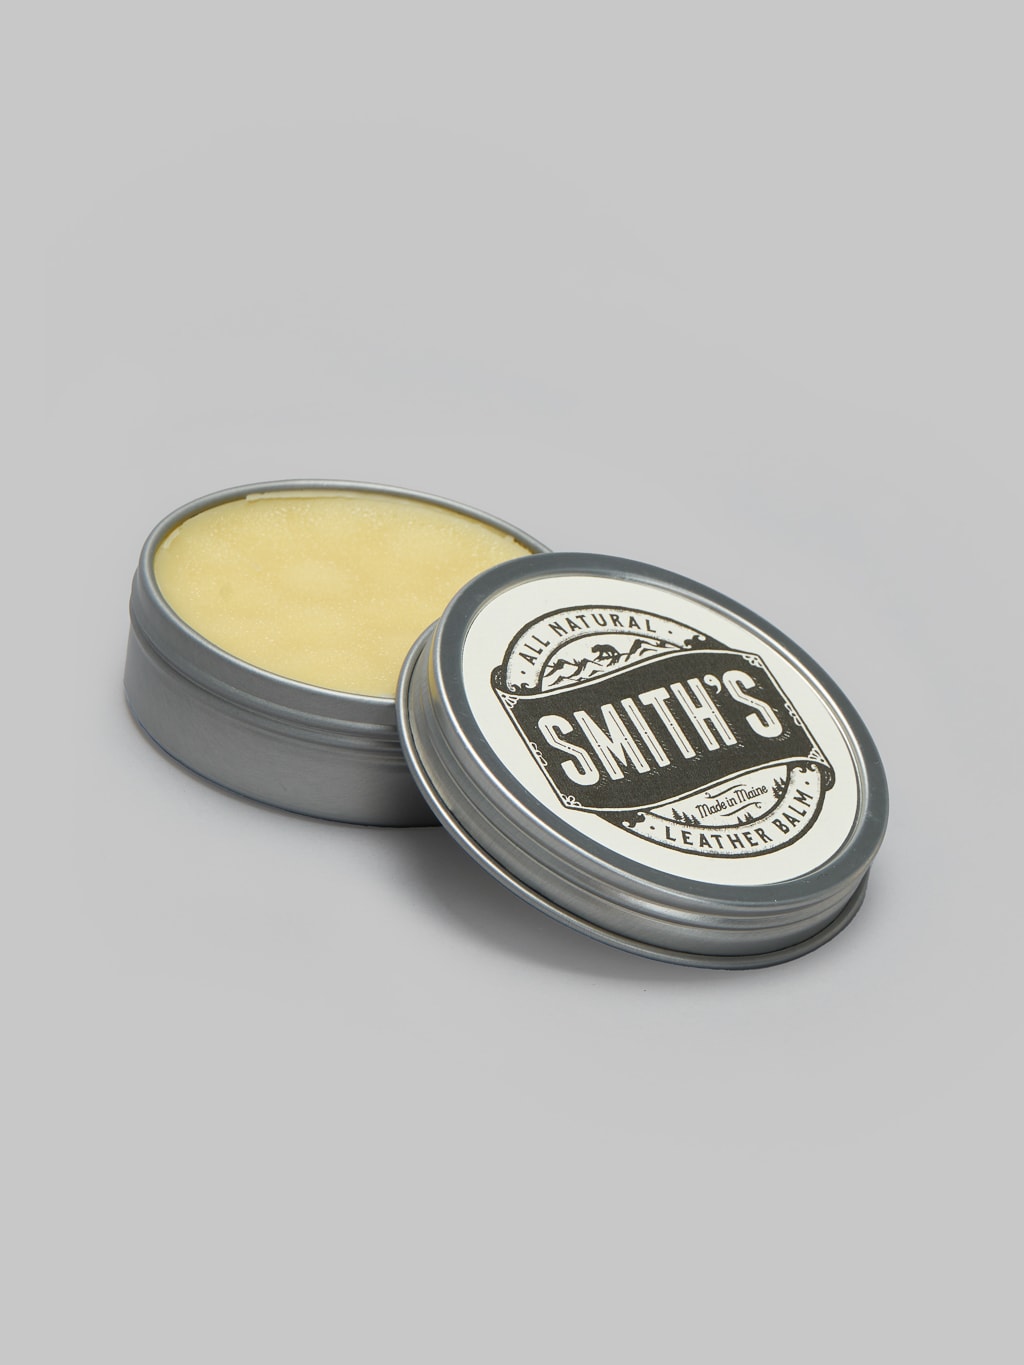 Smith s leather balm boot jacket care